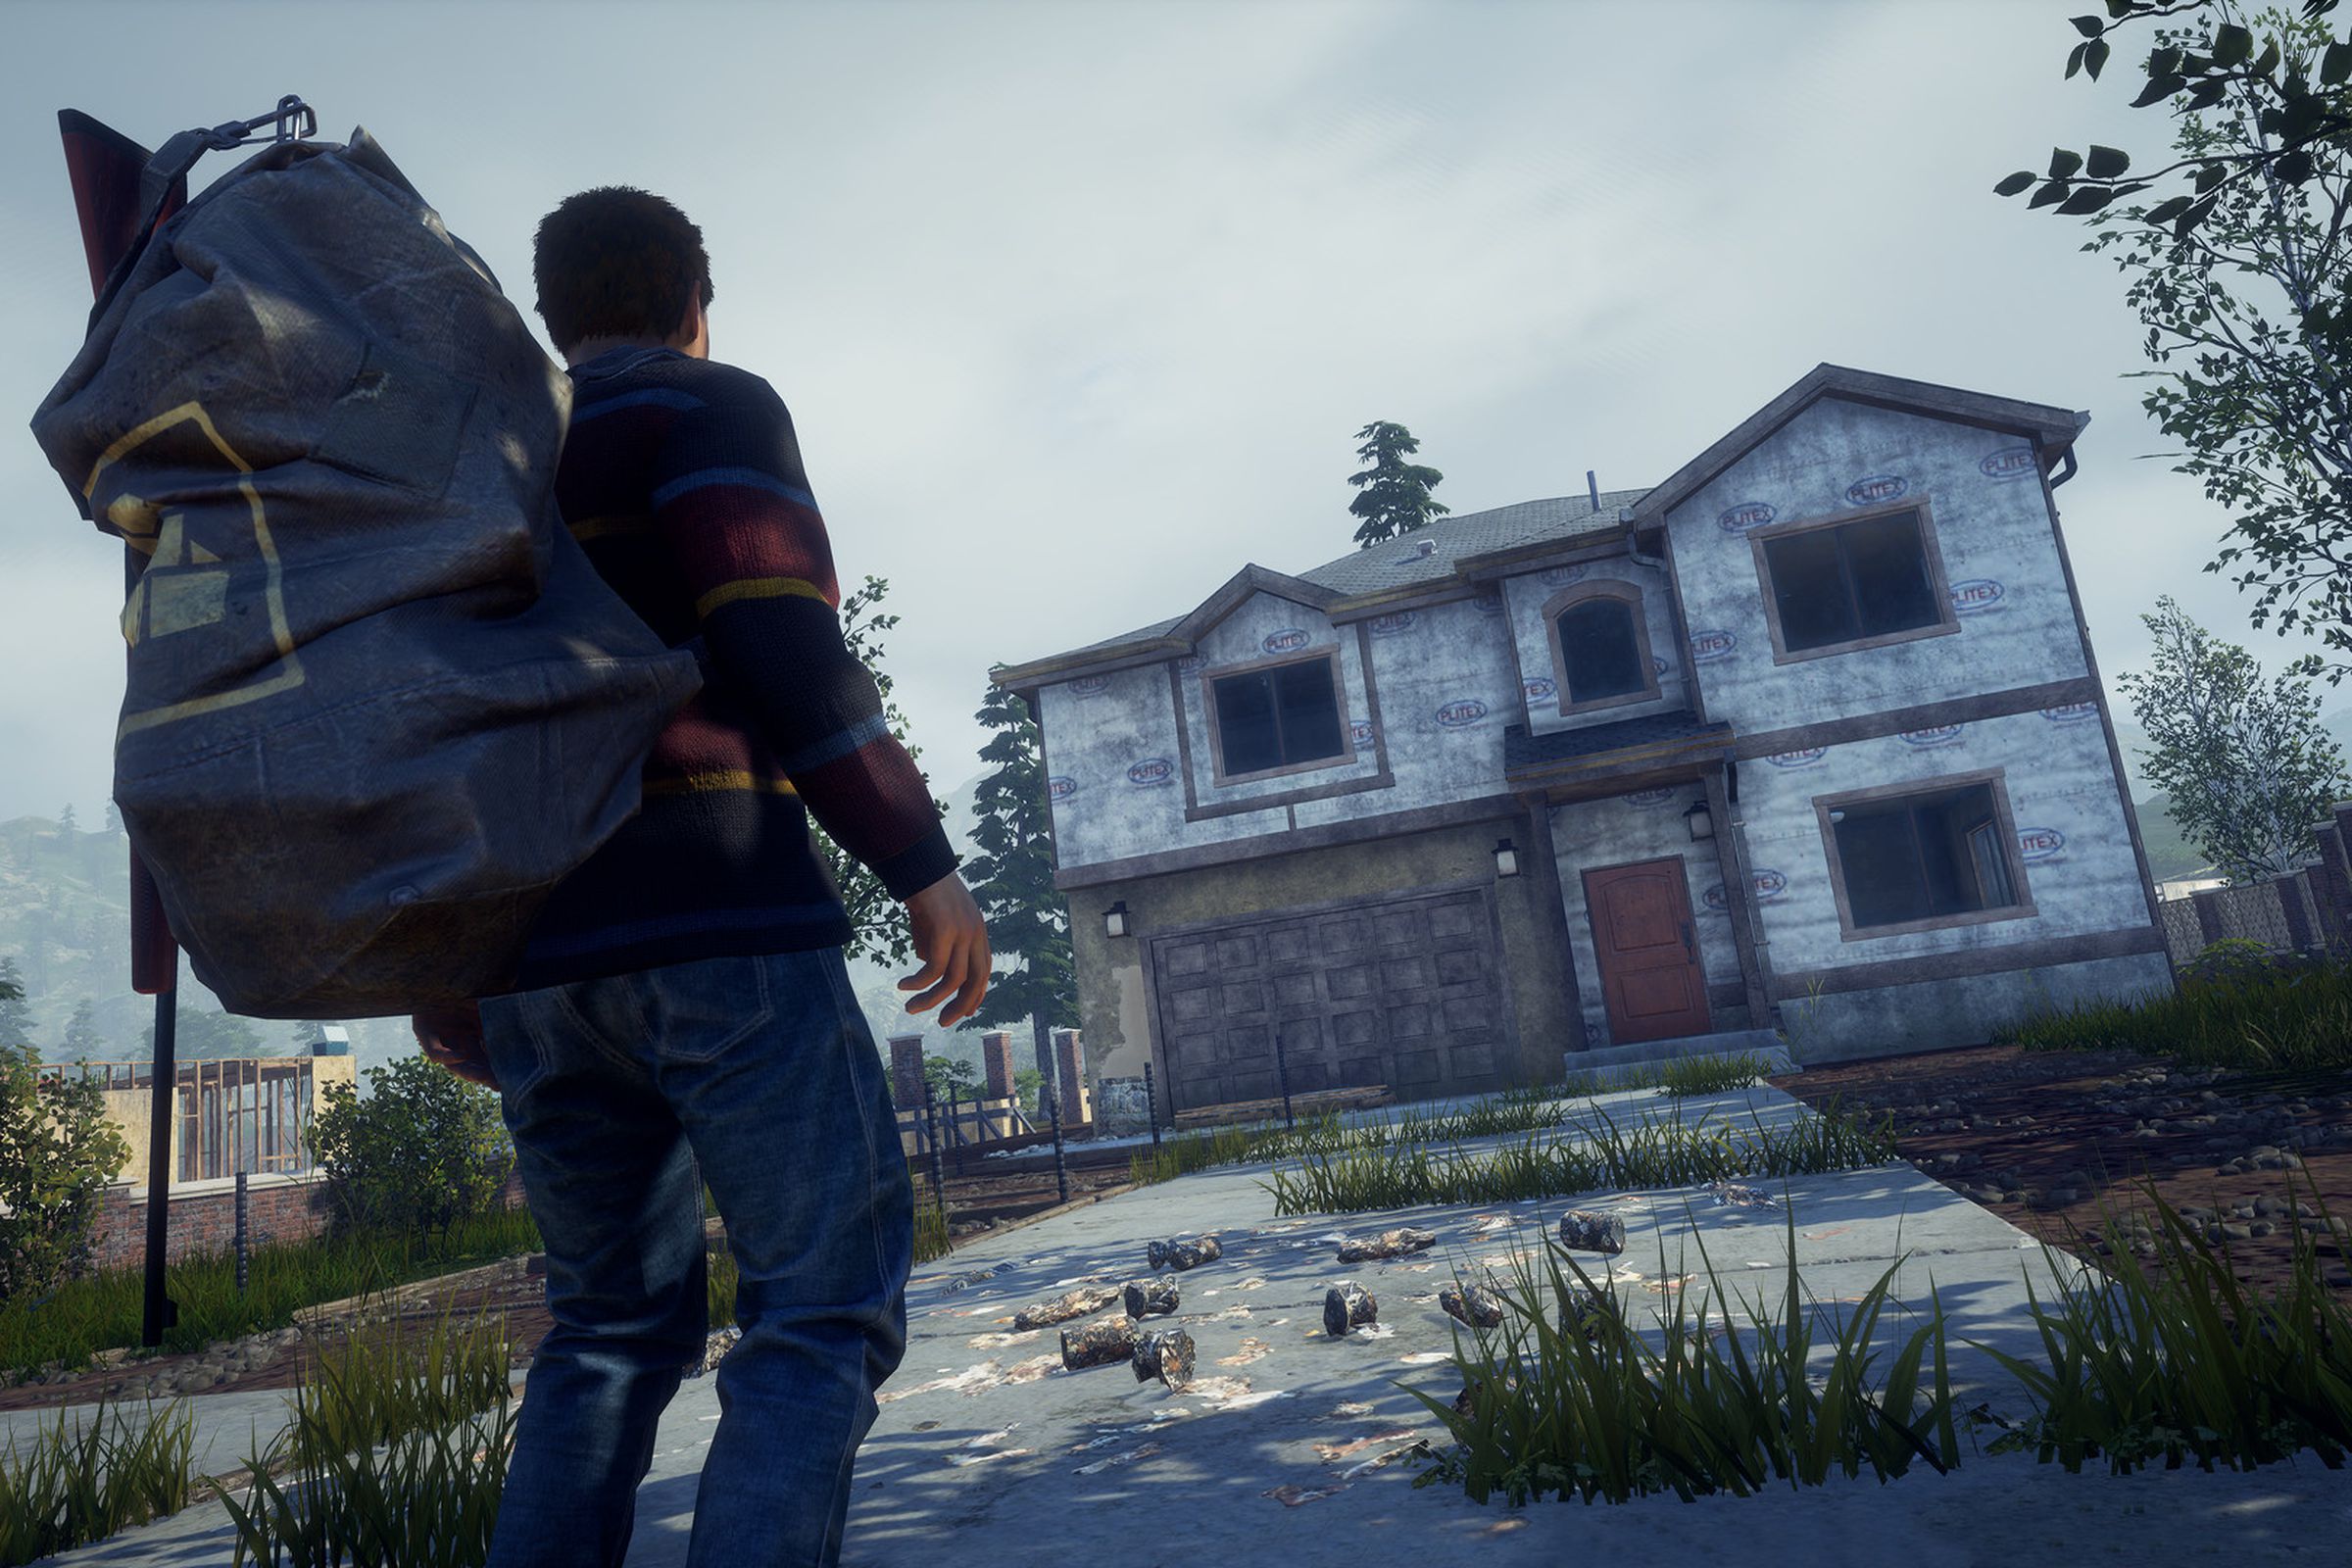 Kotaku reported on Undead Labs, the developers of the State of Decay series.